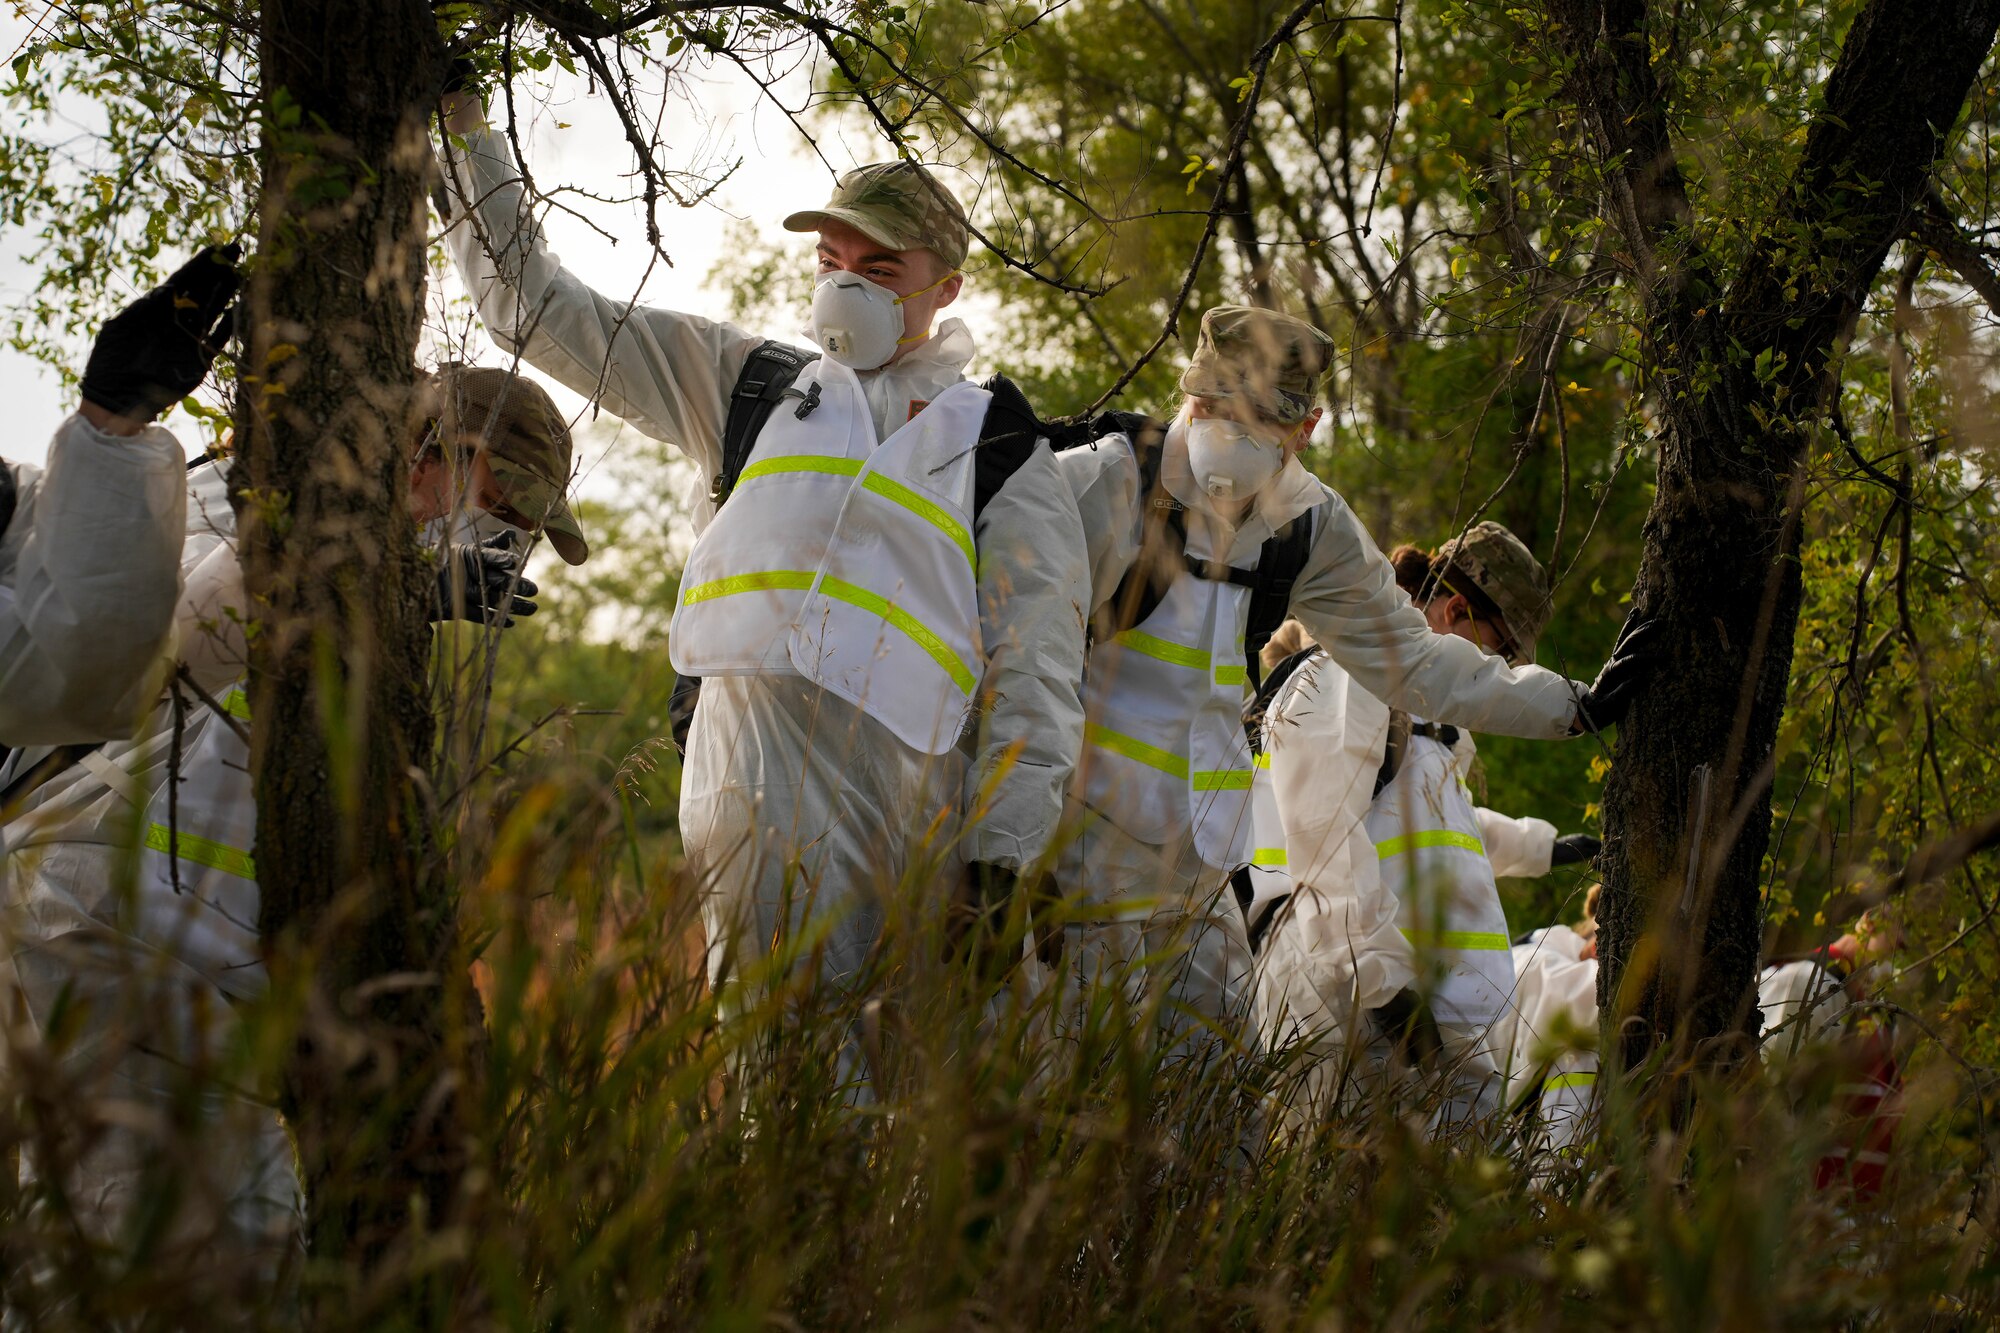 Airmen with the 114th Fighter Wing Force Support Squadron practice search and recovery procedures in various terrain during a field exercise during October’s Unit Training Assembly at Great Bear Recreation Park, Sioux Falls, South Dakota, Oct. 1, 2022. During the training, individuals used meticulous search methods to locate items that may be found in a real-world situation like personal effects and human remains. (U.S. Air National Guard photo by Staff Sgt. Jorrie Hart)